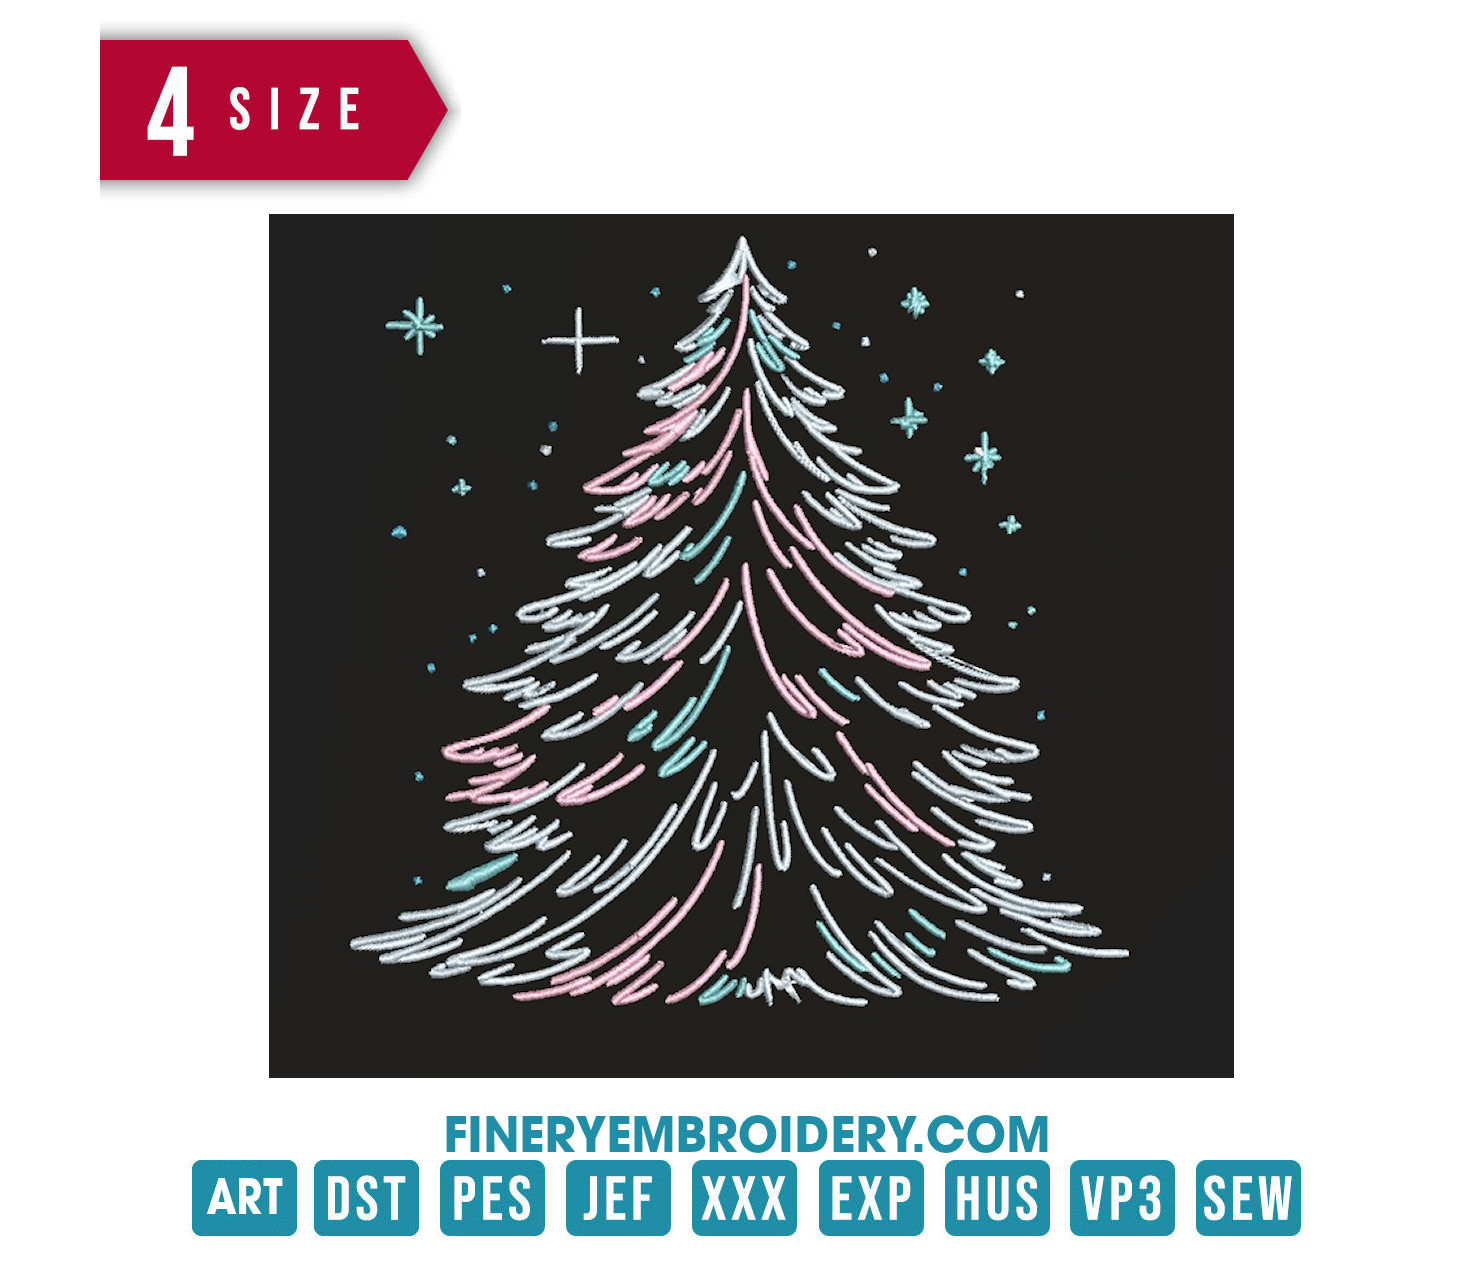 Winter Christmas Tree: Embroidery Design - FineryEmbroidery